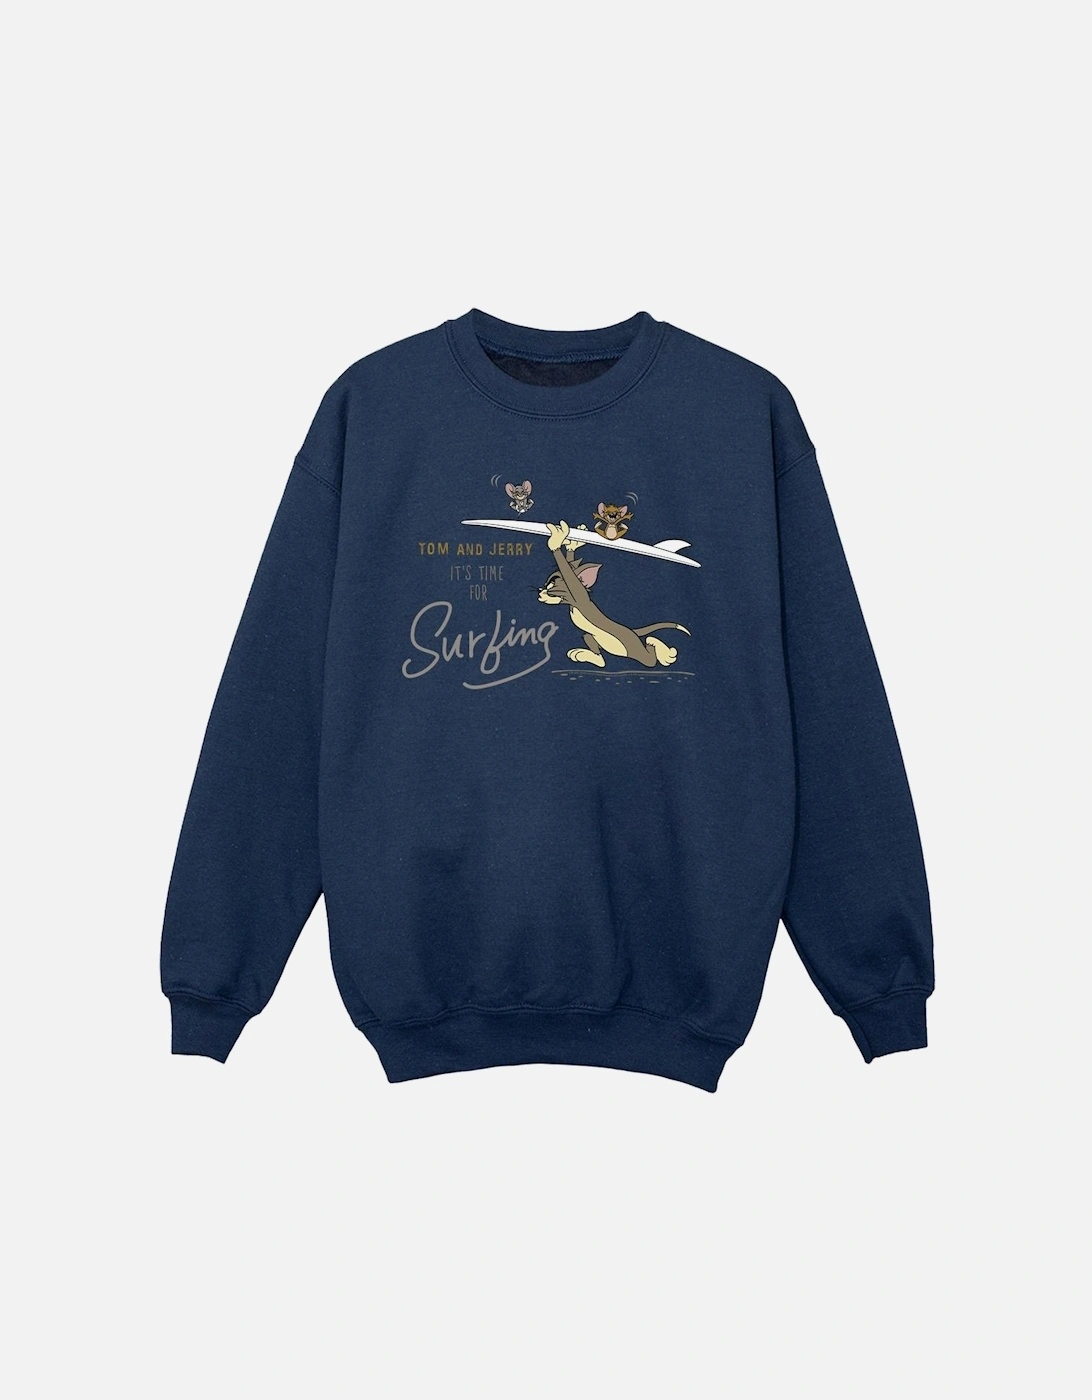 Tom And Jerry Girls It?'s Time For Surfing Sweatshirt, 4 of 3